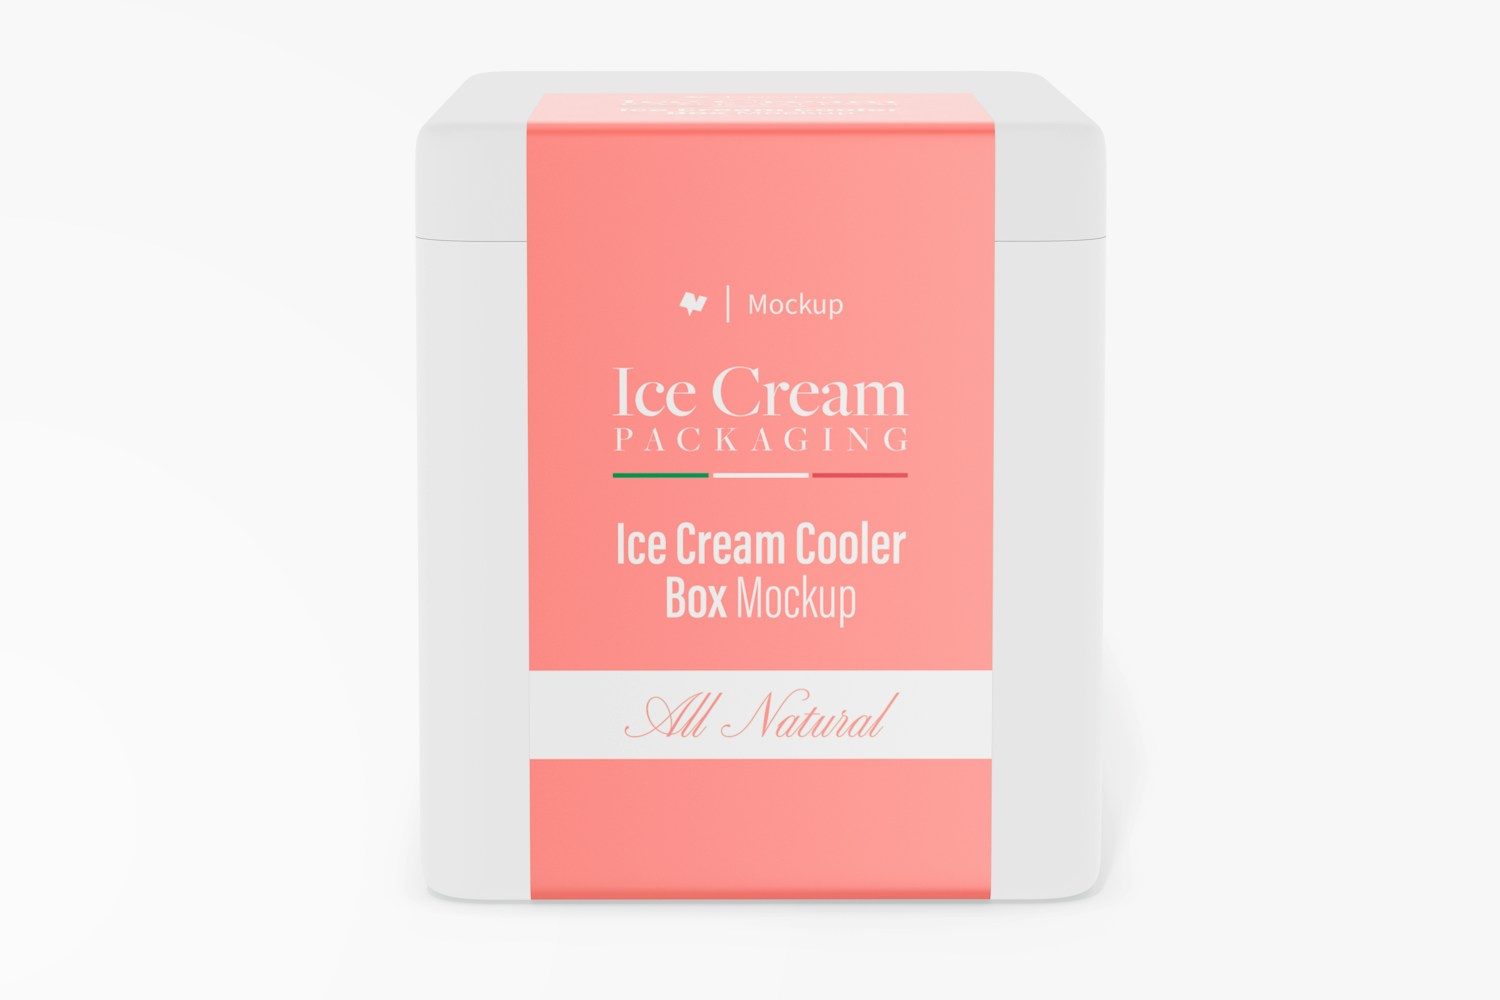 Ice Cream Cooler Box Mockup, Front View